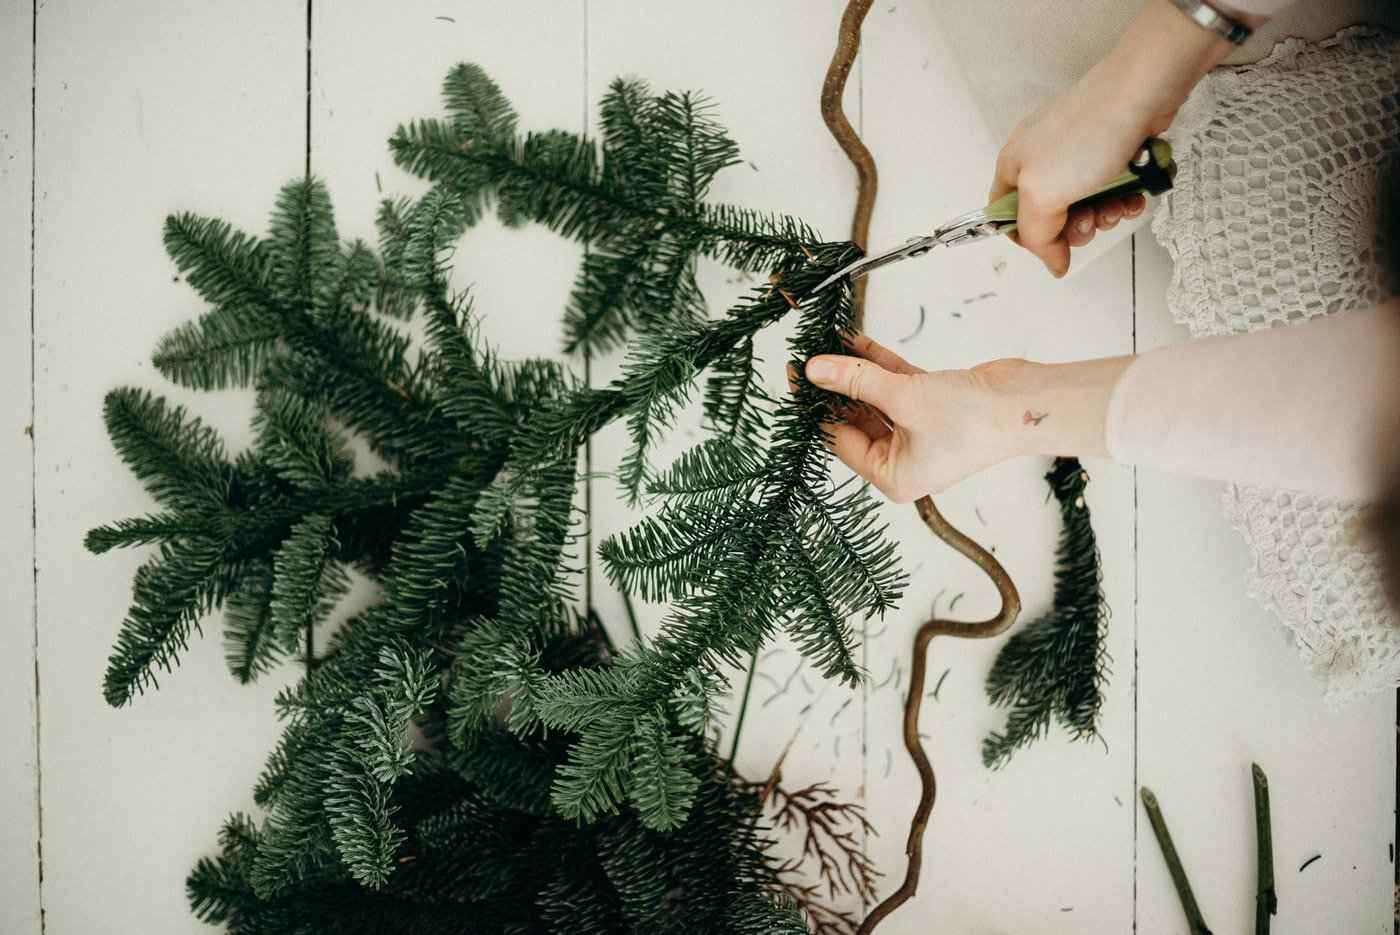 woman cutting fir bough - bring natural greenery in for the holidays